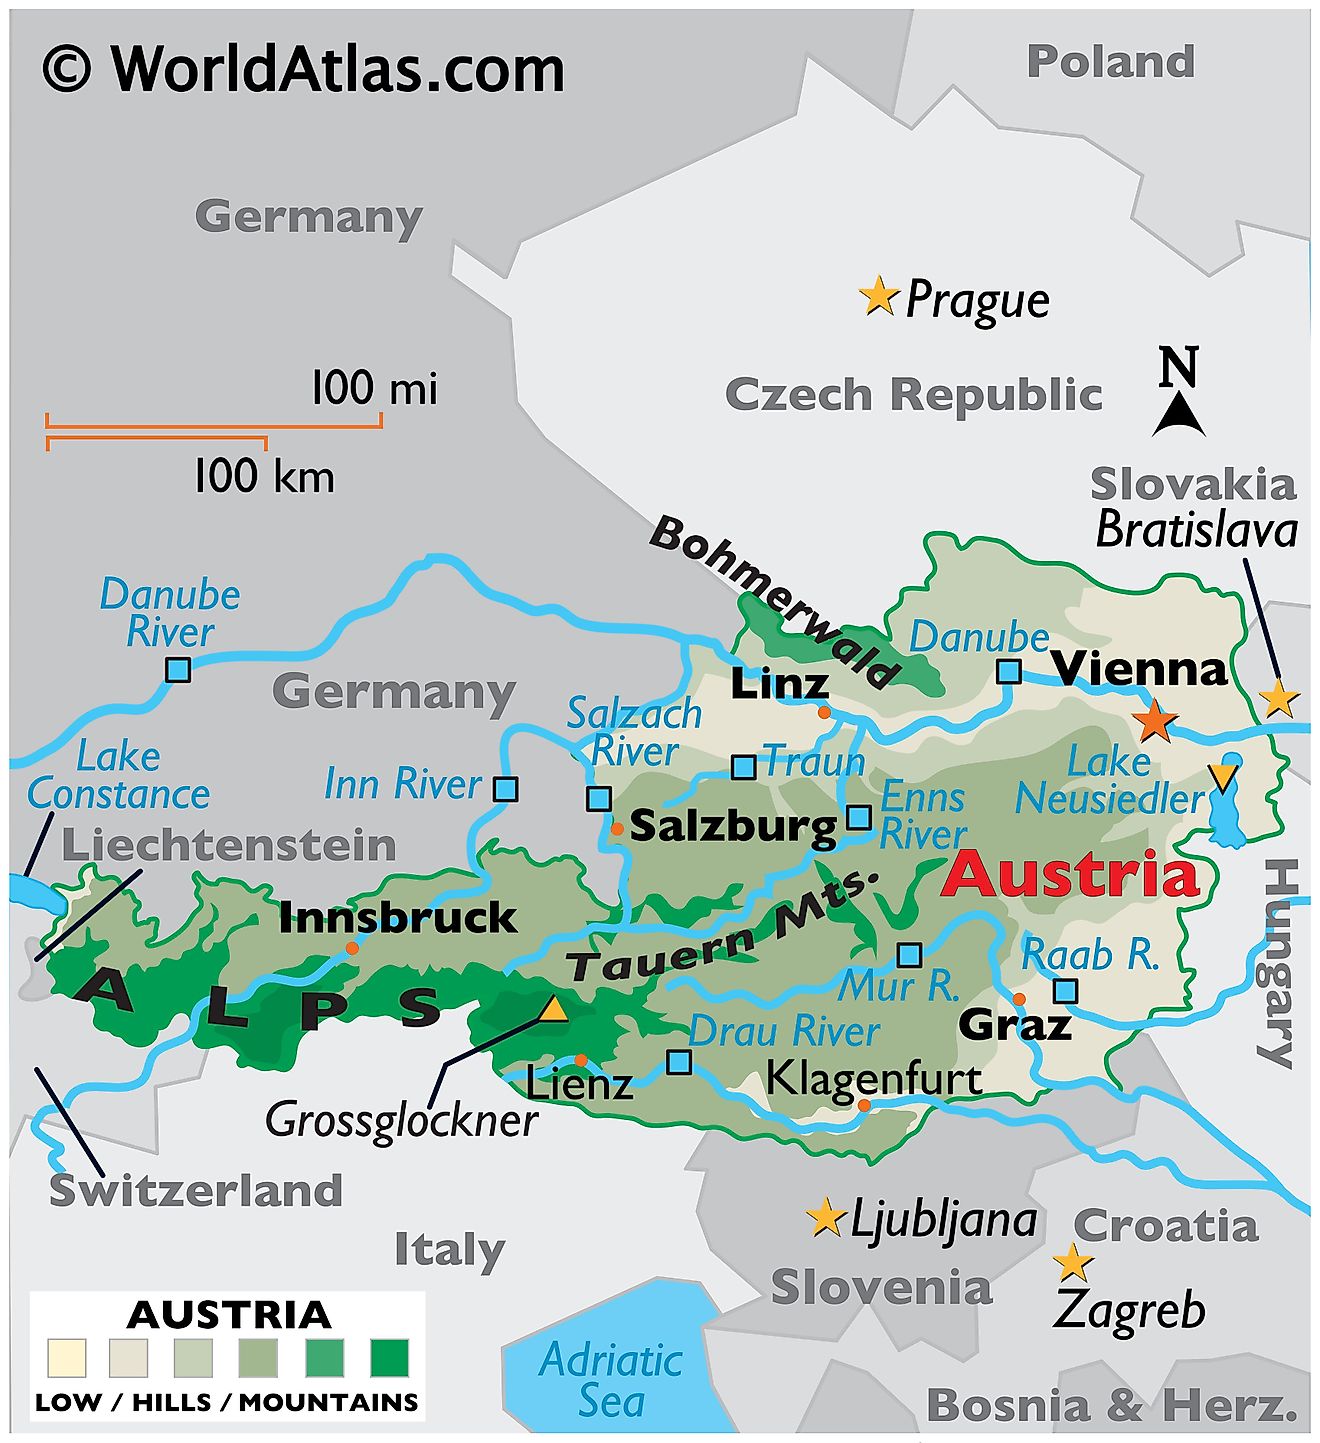 Physical Map of Austria showing terrain, major rivers, extreme points, mountain ranges, Lake Neusiedler, important cities, international boundaries, etc.